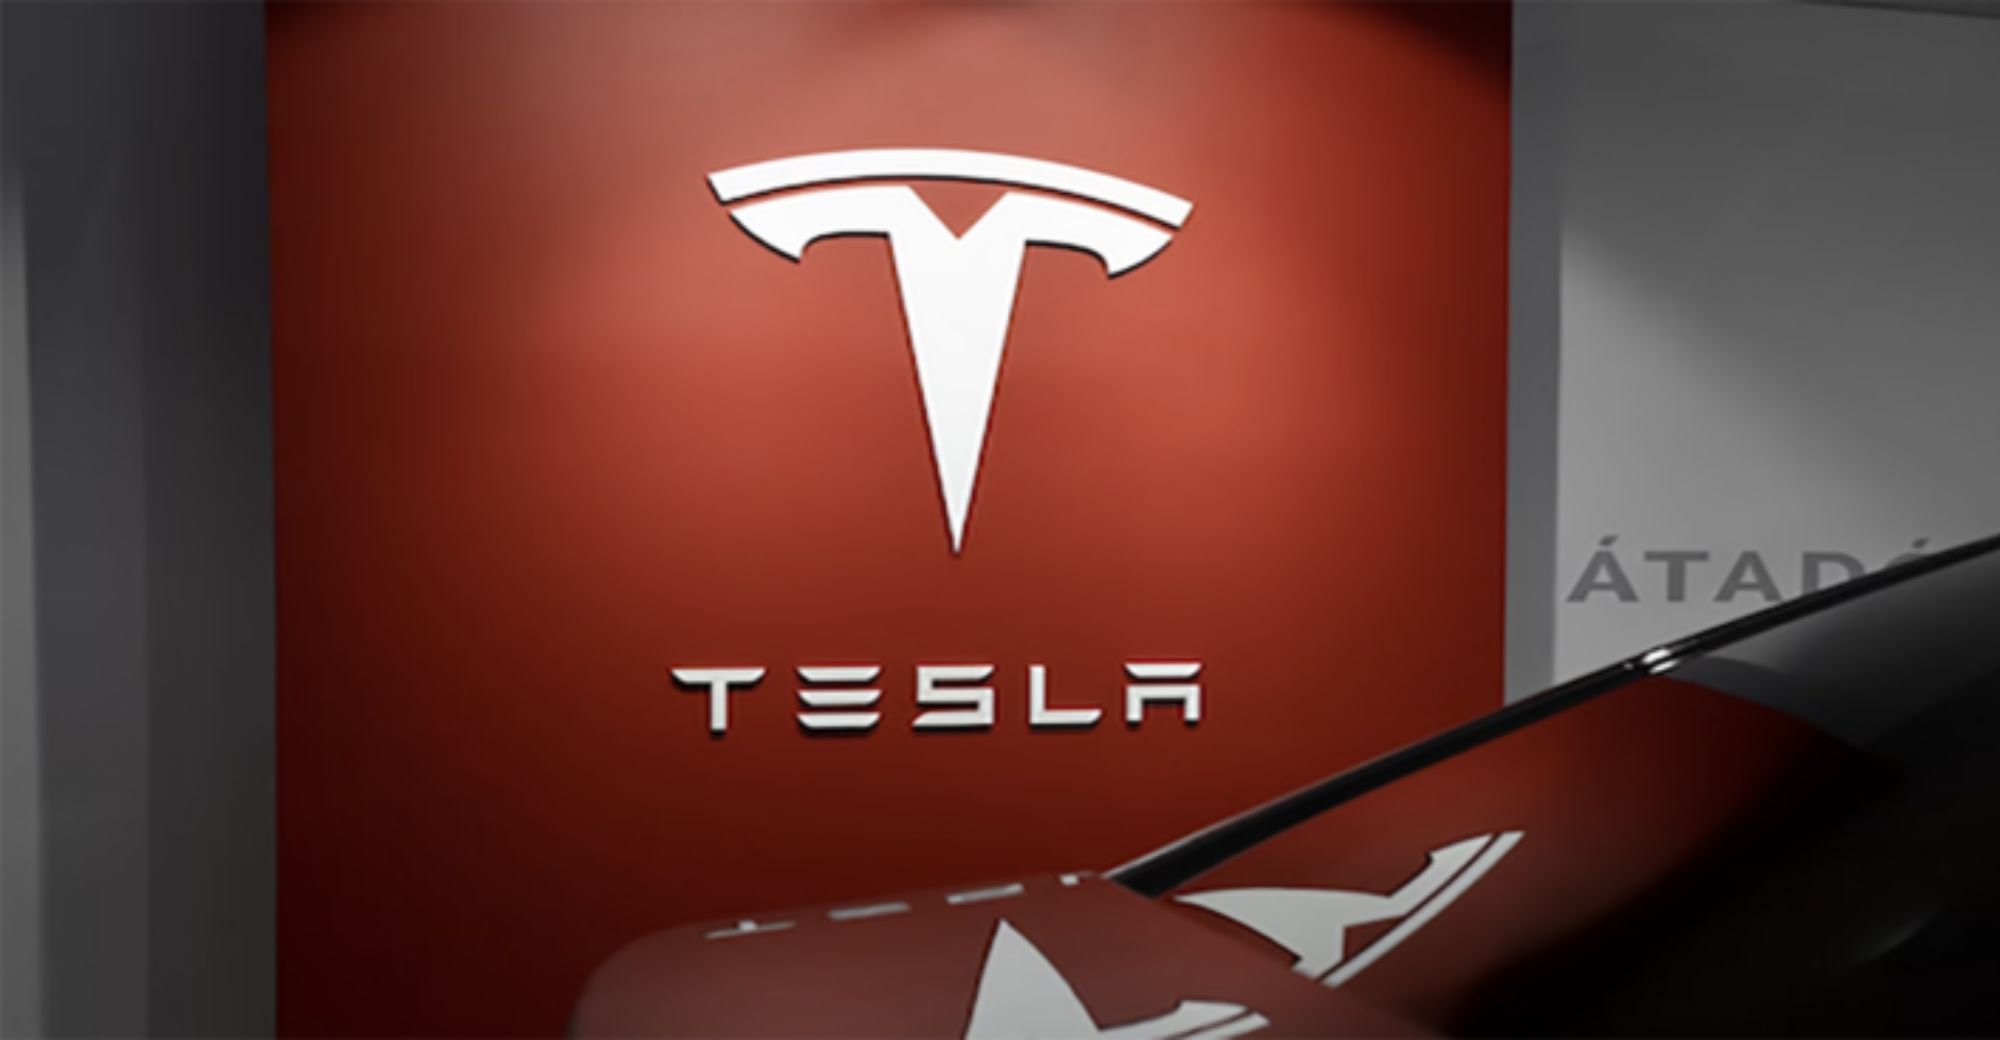 The News States that JD.com Is Going to Sell Tesla Cars